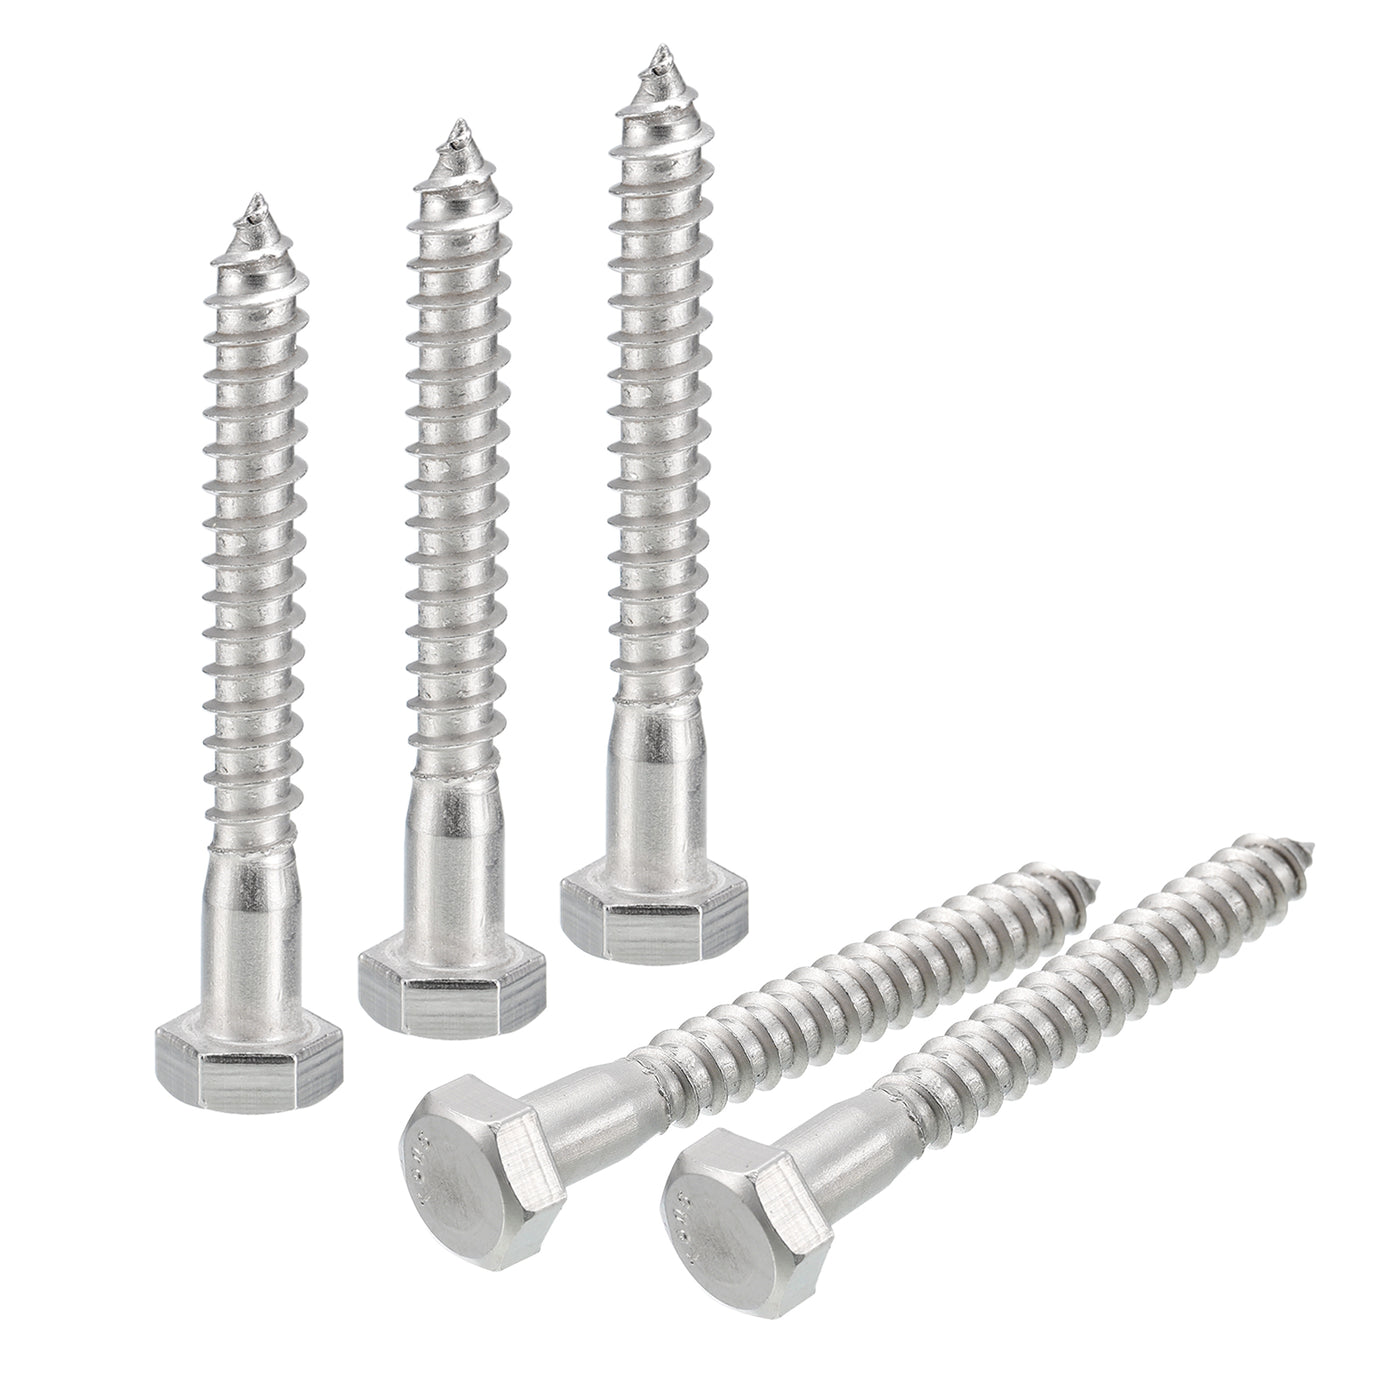 uxcell Uxcell Hex Head Lag Screws Bolts, 10pcs 5/16" x 2-1/2" 304 Stainless Steel Wood Screws